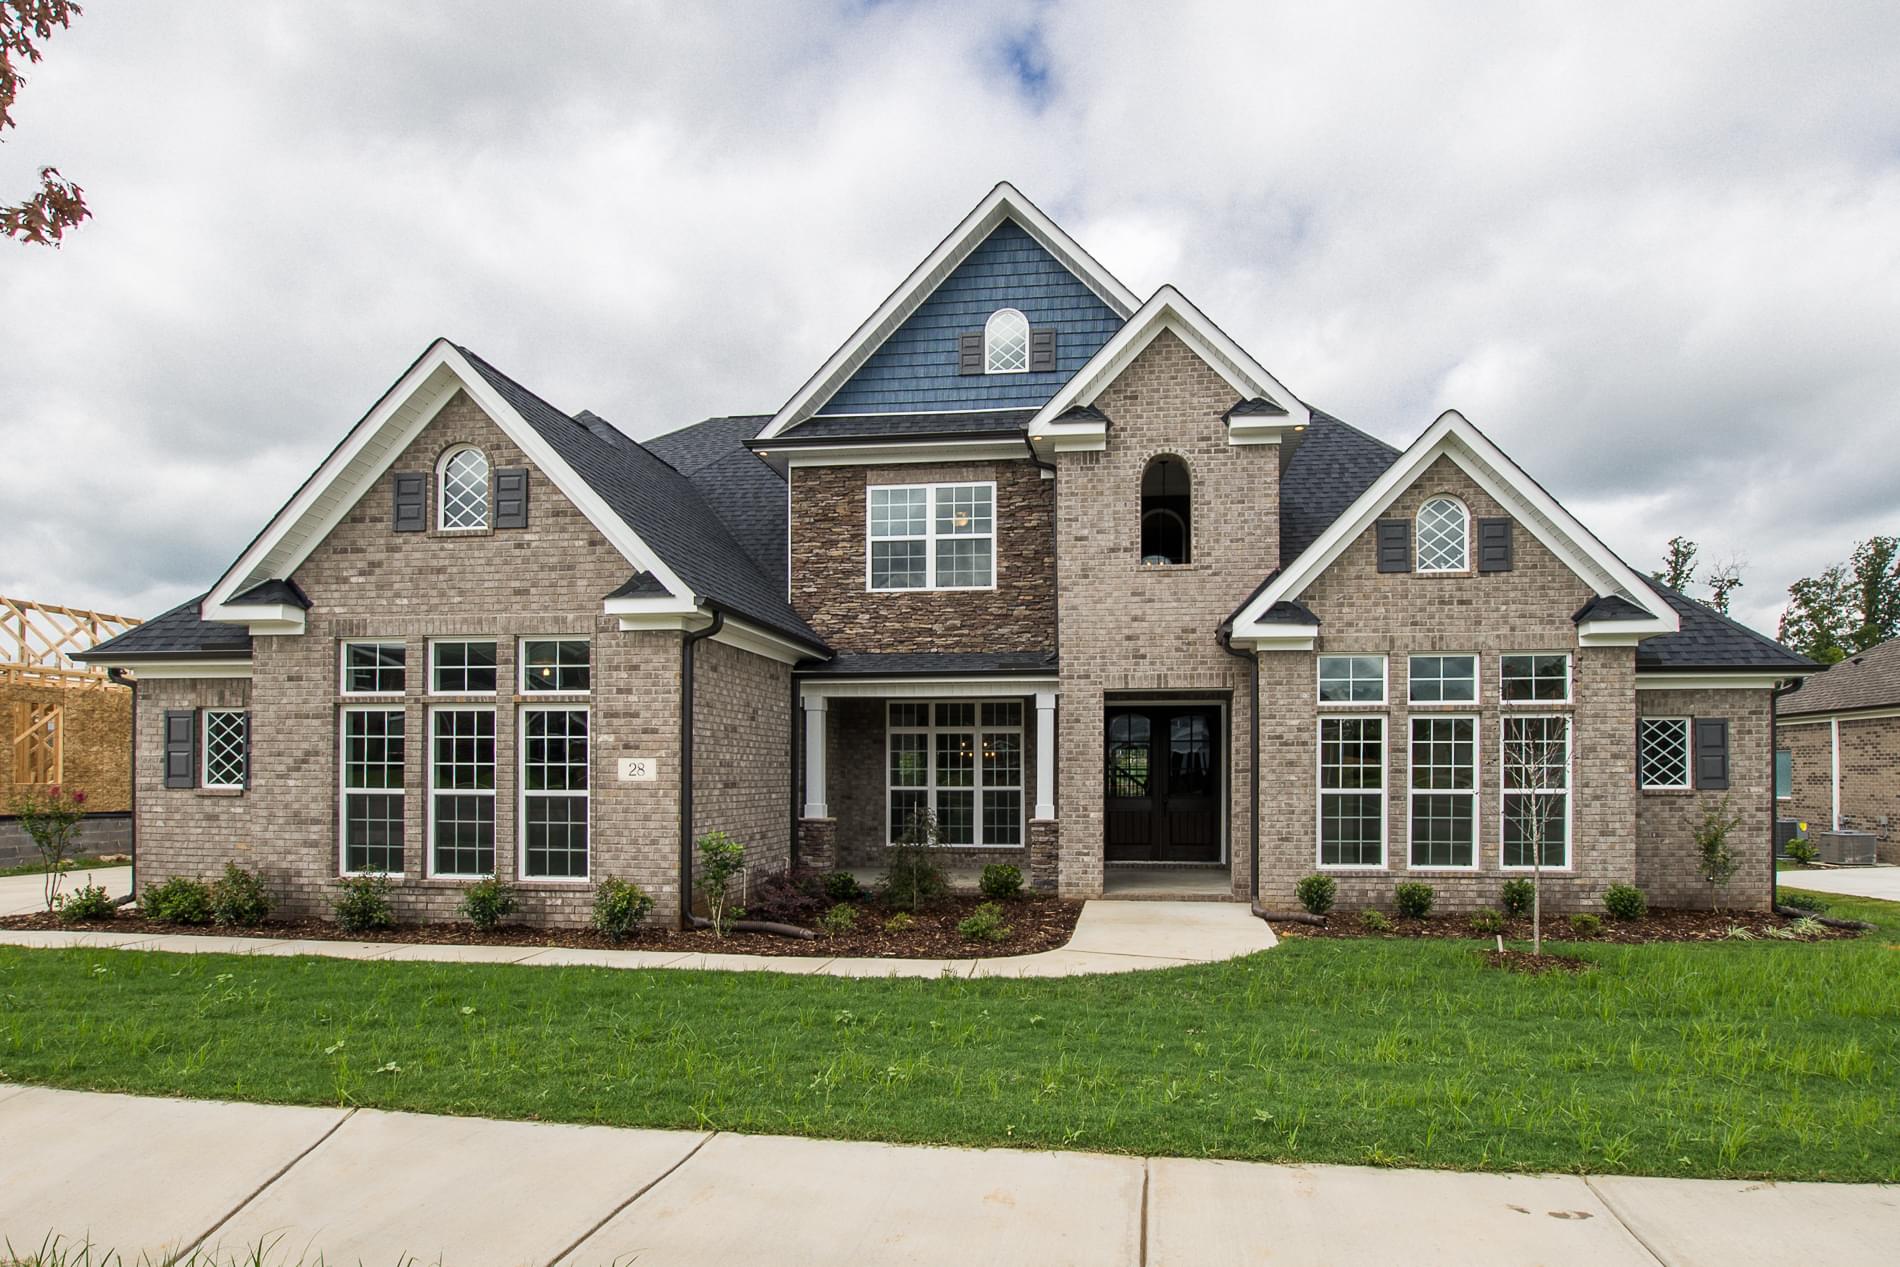 Elevation A. 4br New Home in Meridianville, AL